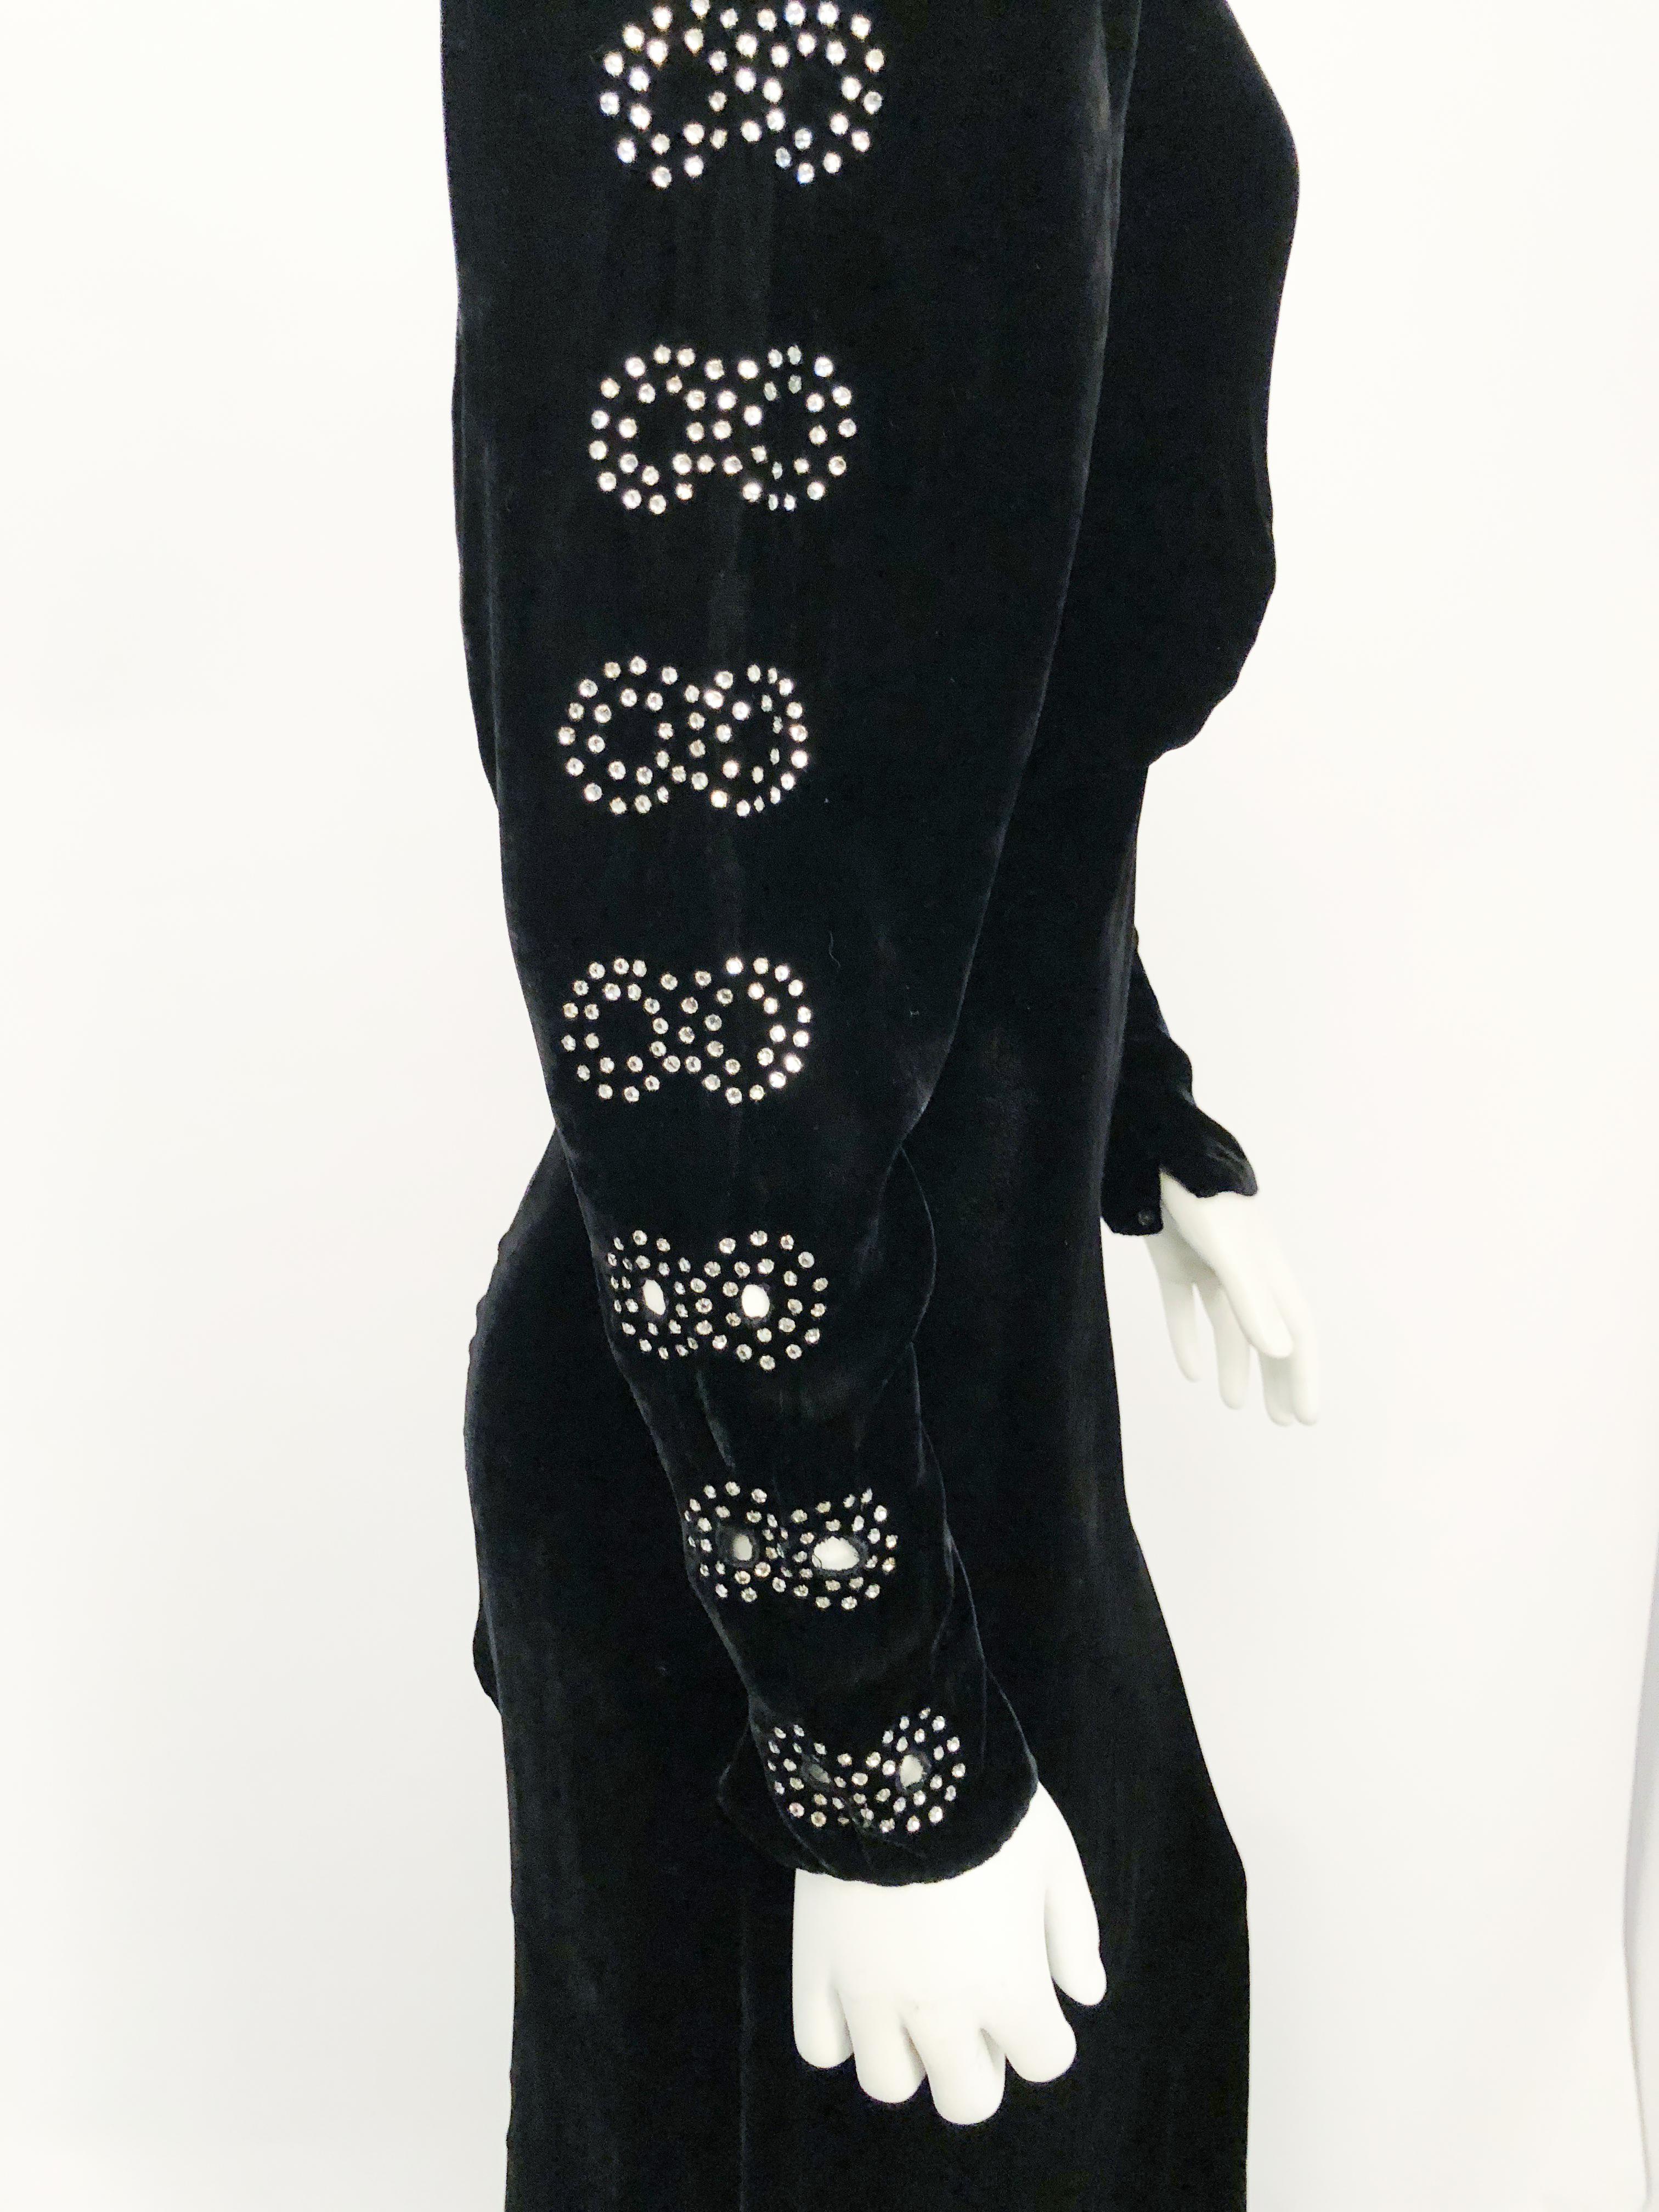 Women's Black Silk Velvet Gown with Rhinestone Accents, 1930s  For Sale